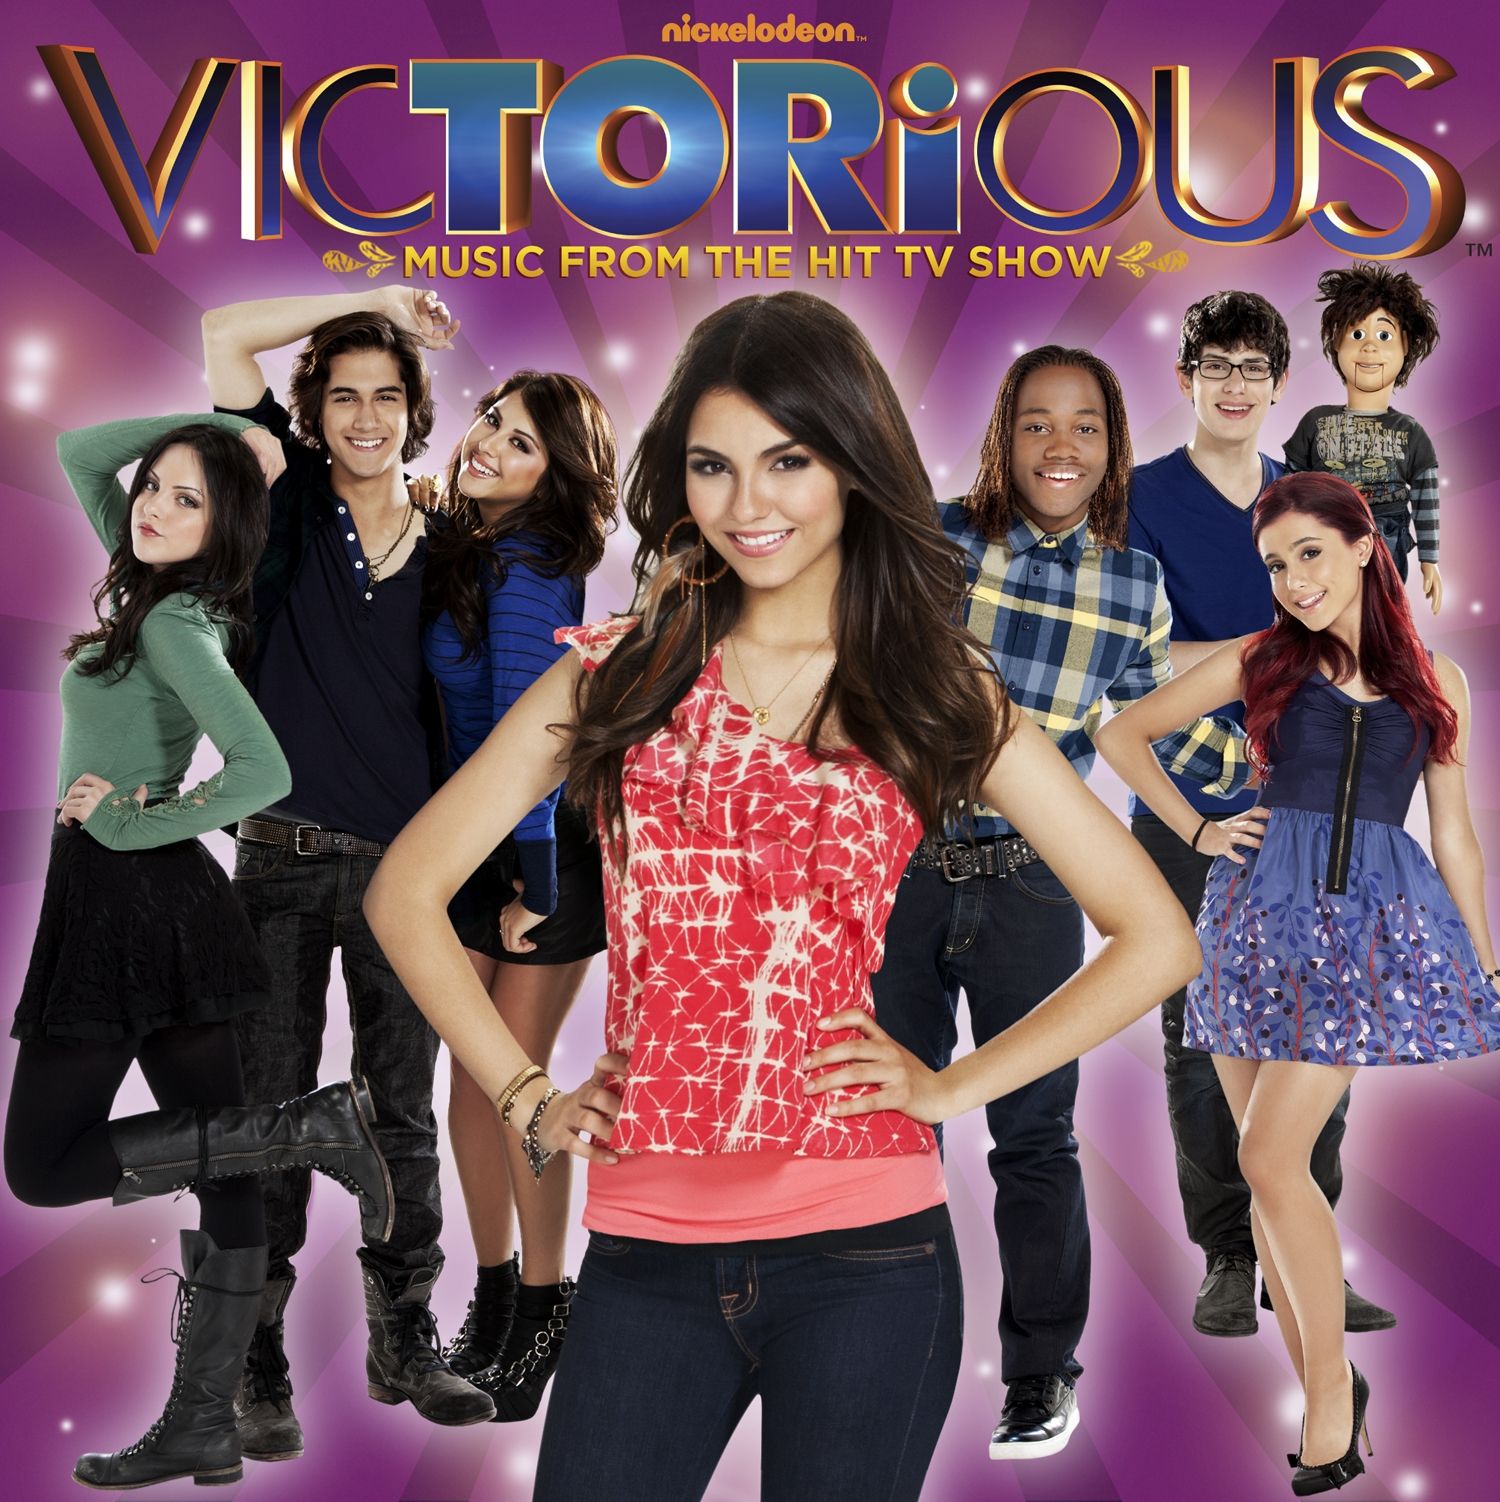 Imagem do álbum Victorious... Music from the Hit TV Show do(a) artista Victoria Justice